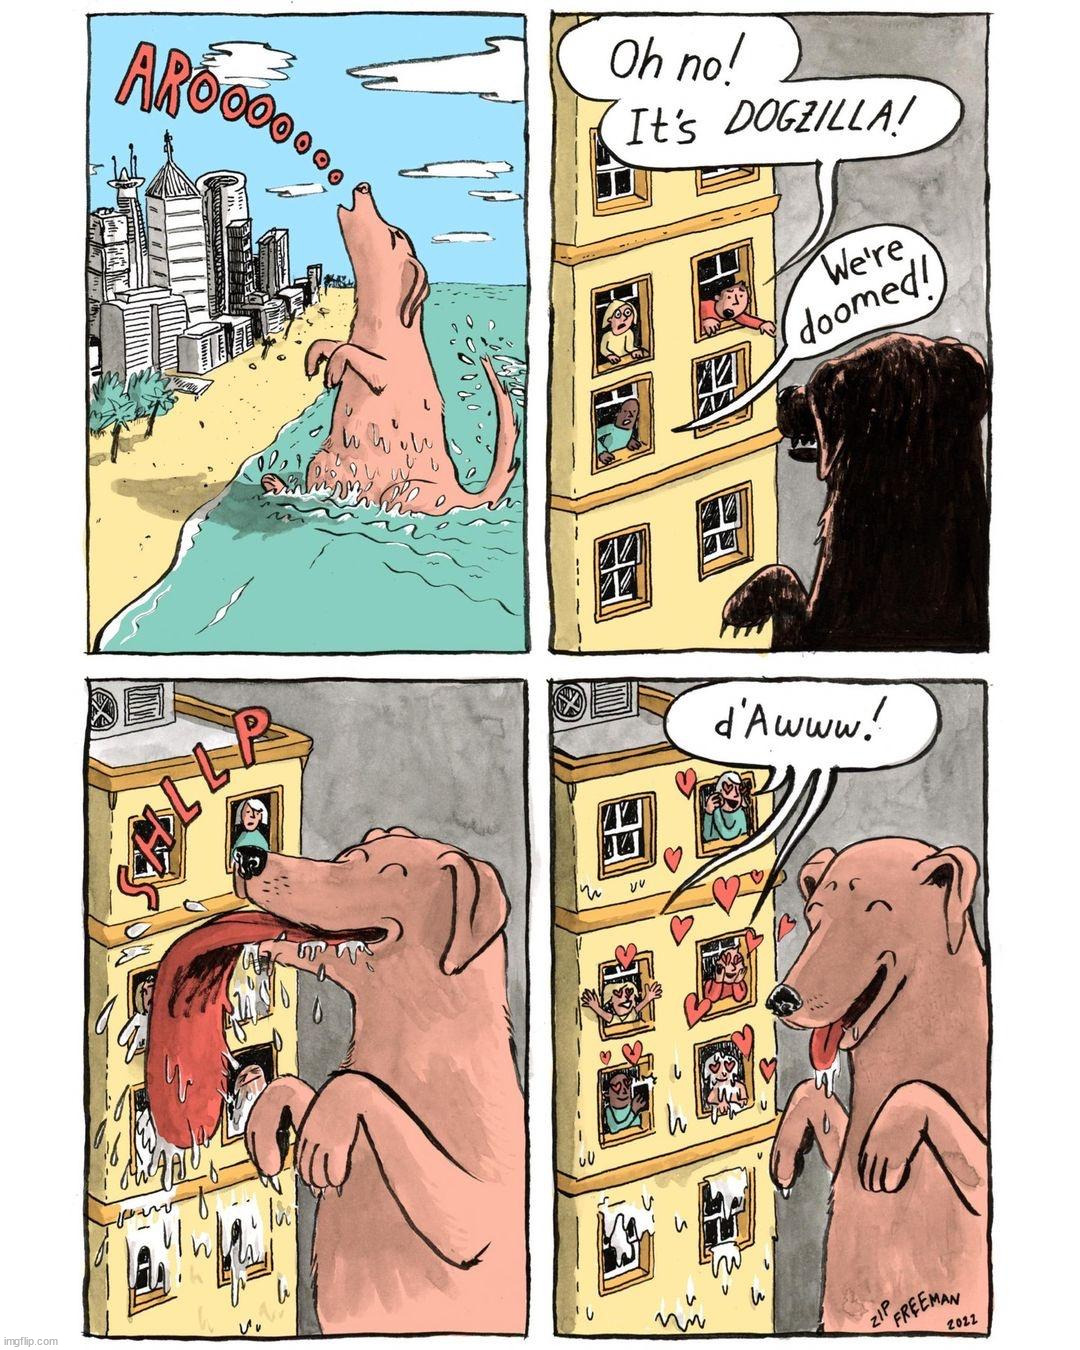 Dogzilla | image tagged in comics,dogs,cute,wholesome | made w/ Imgflip meme maker